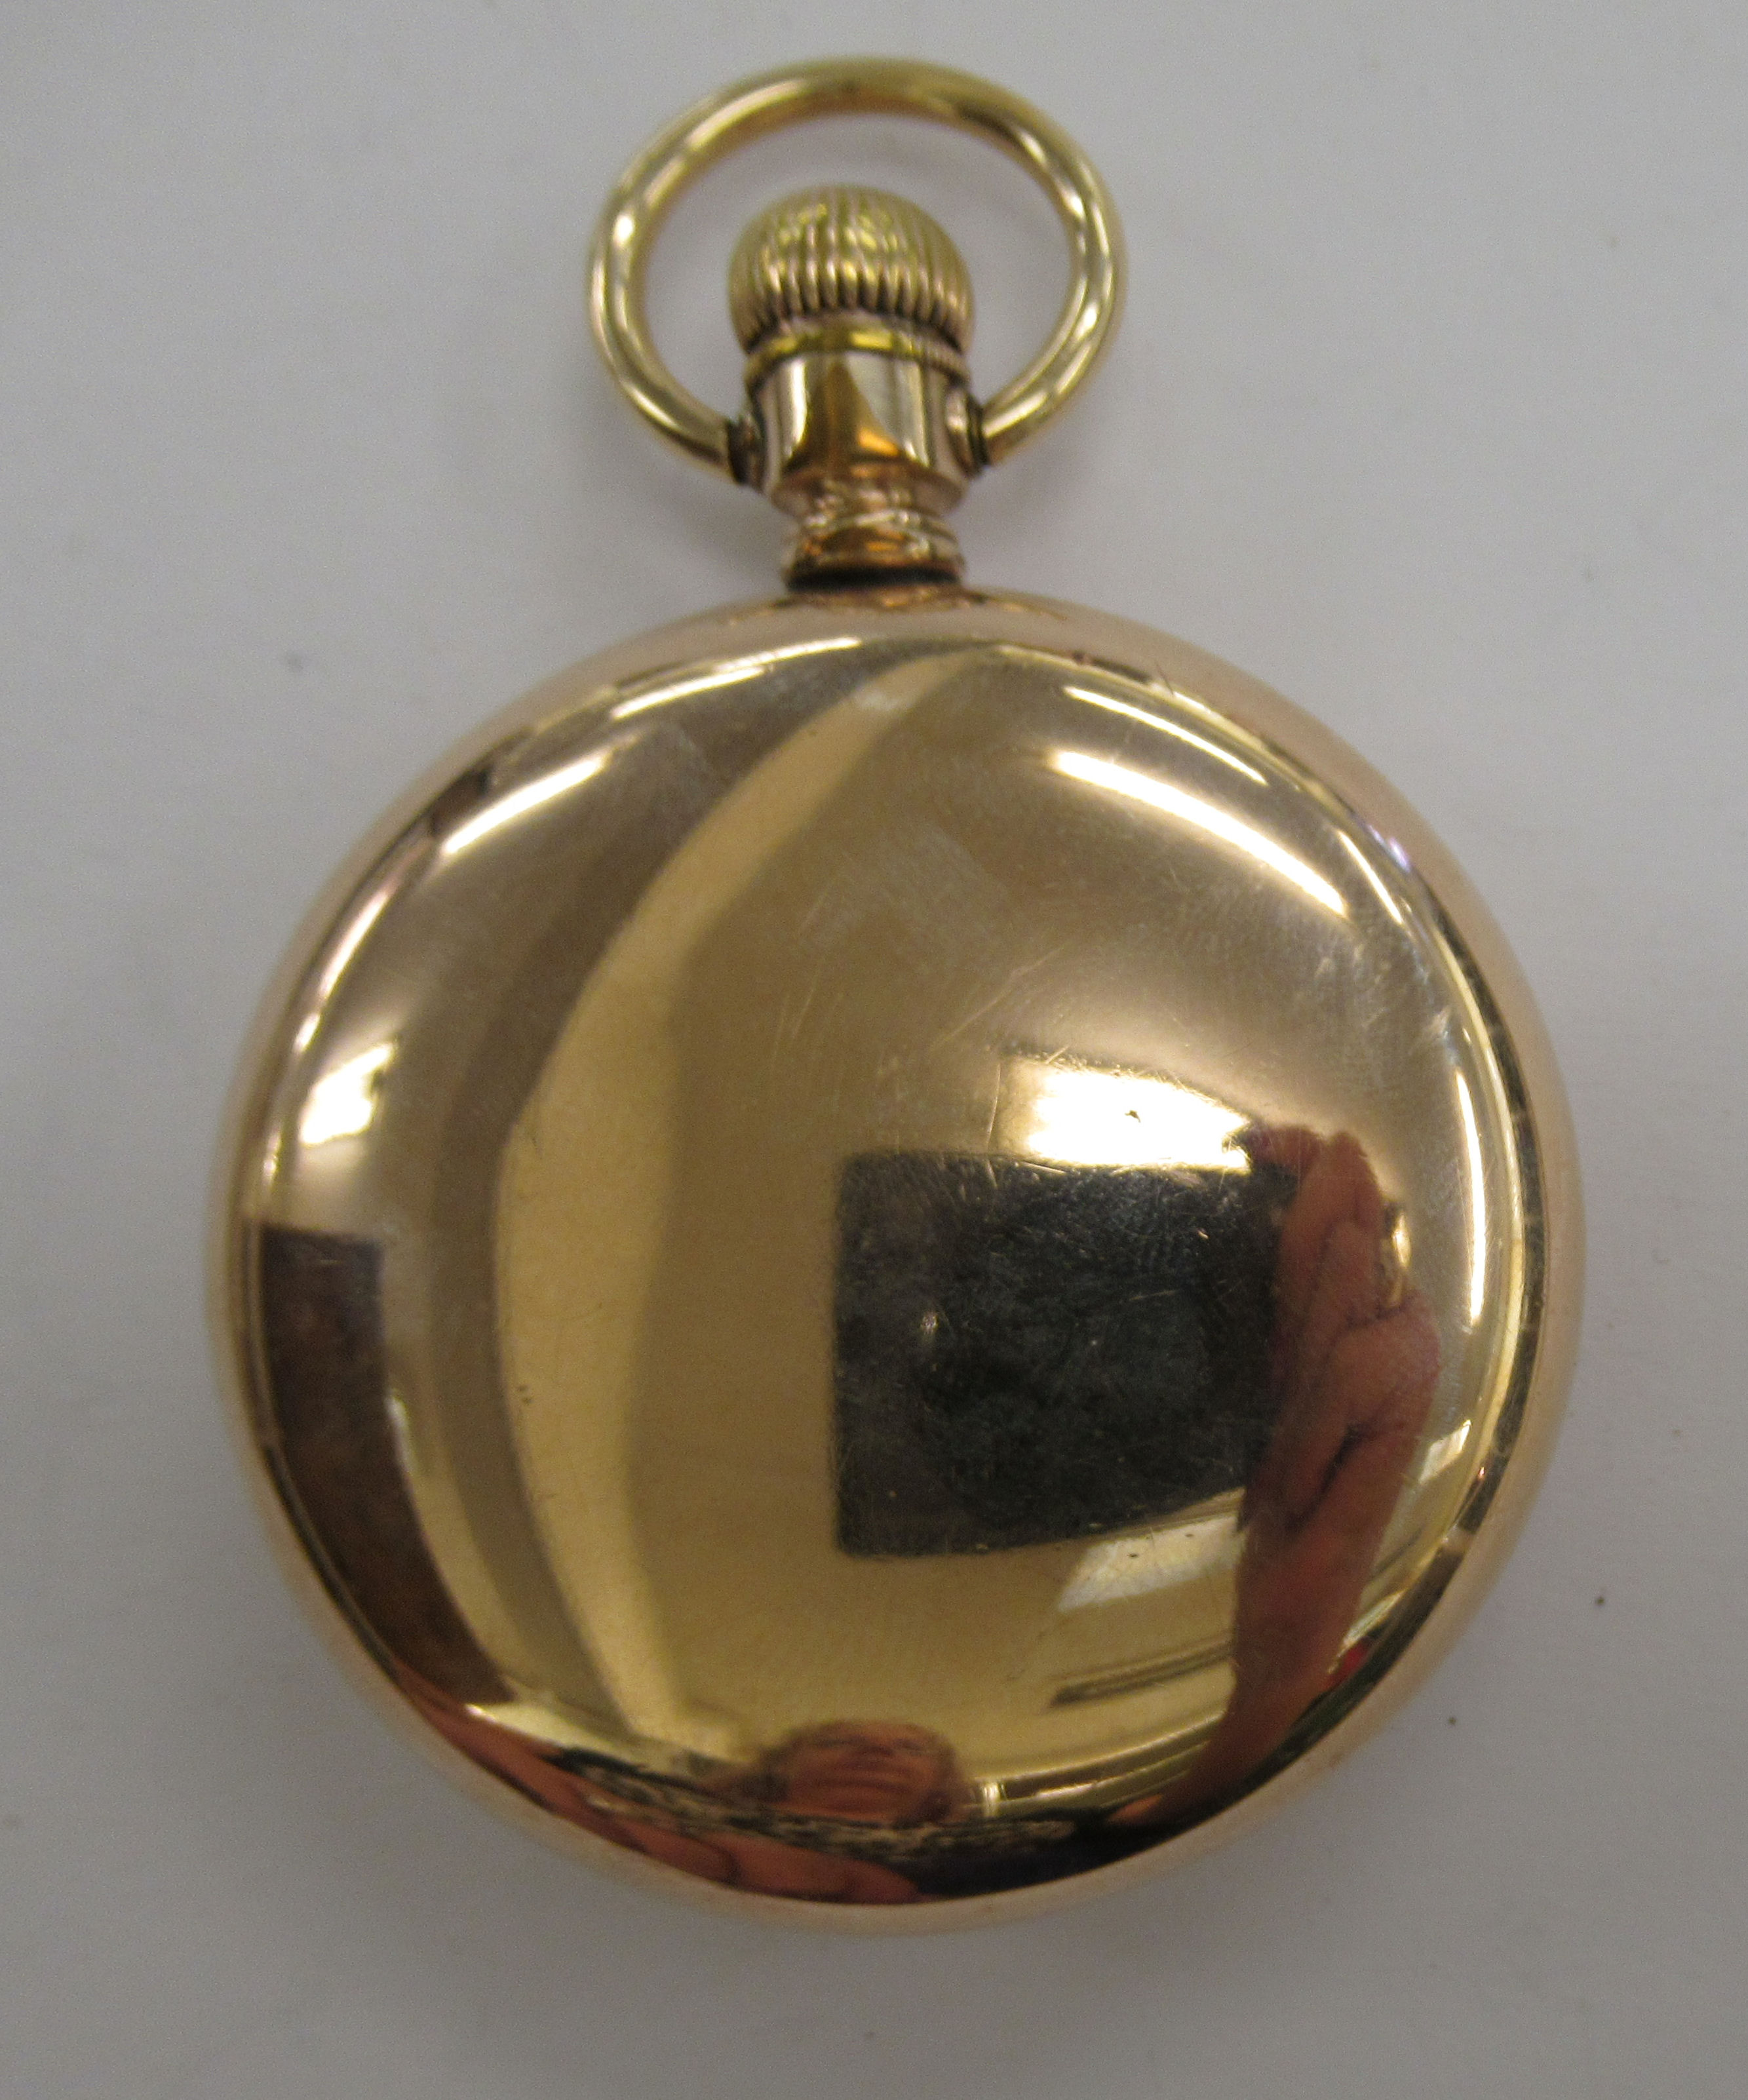 An early 20thC Illinois Watch company 21 jewel gold plated pocket watch, - Image 2 of 2